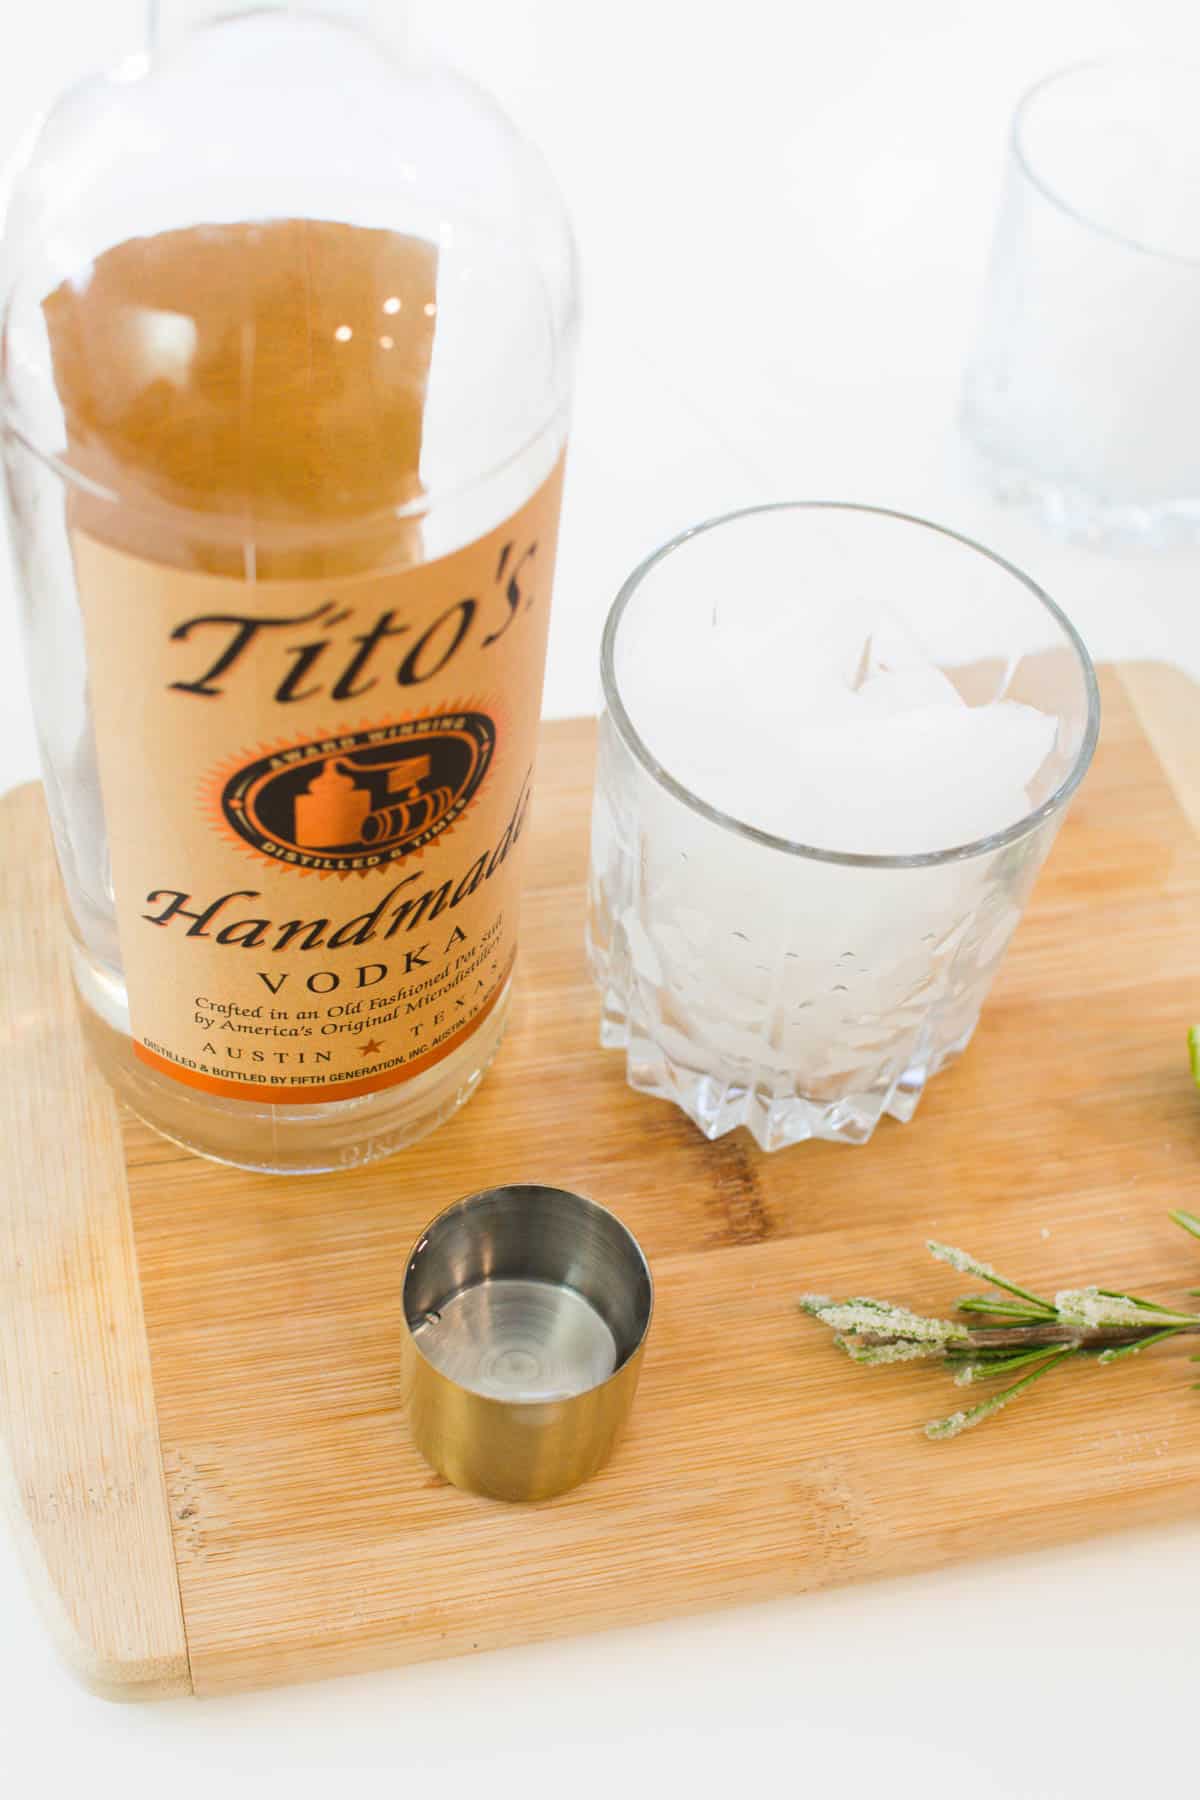 A jigger next to a bottle of Tito's vodka and a cocktail glass with ice.